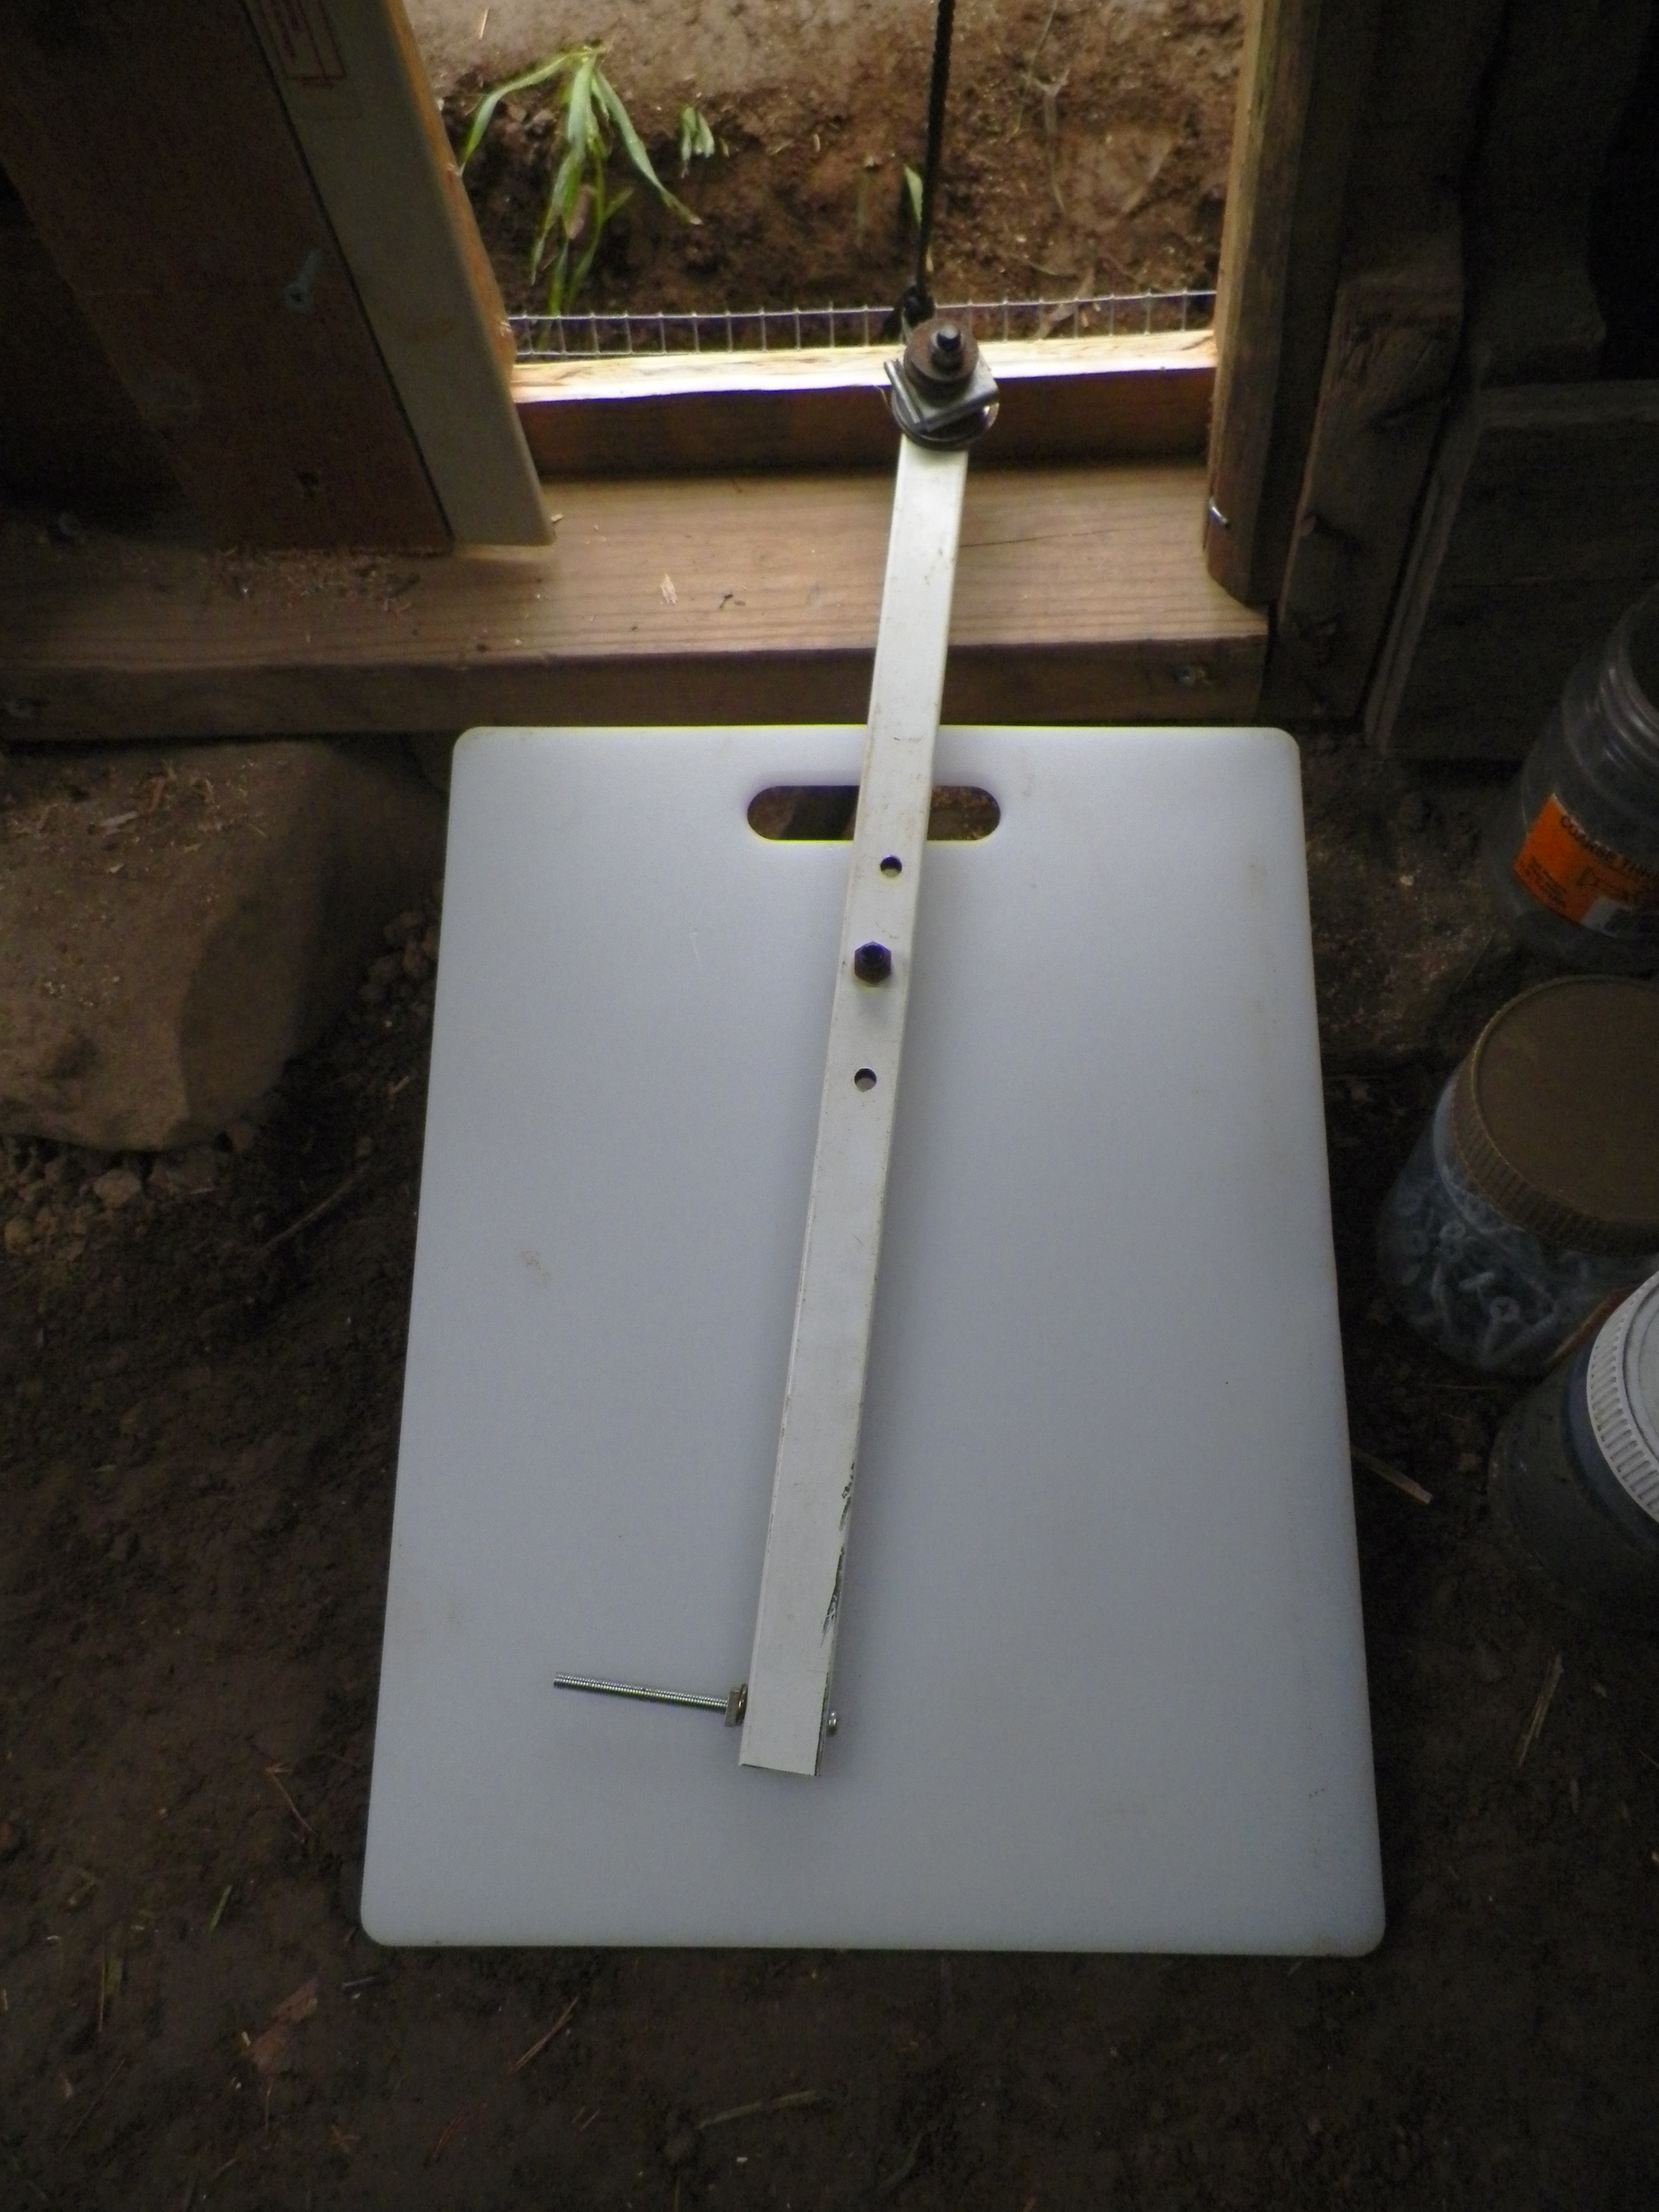 Self latching chicken door made of a cutting board. Swing arm of metal part from an EZ-up frame. This is significant to us, as we are full time crafts people and the folding tent covers are a big part of our lives. Counter weights of washers, and bolt pin.